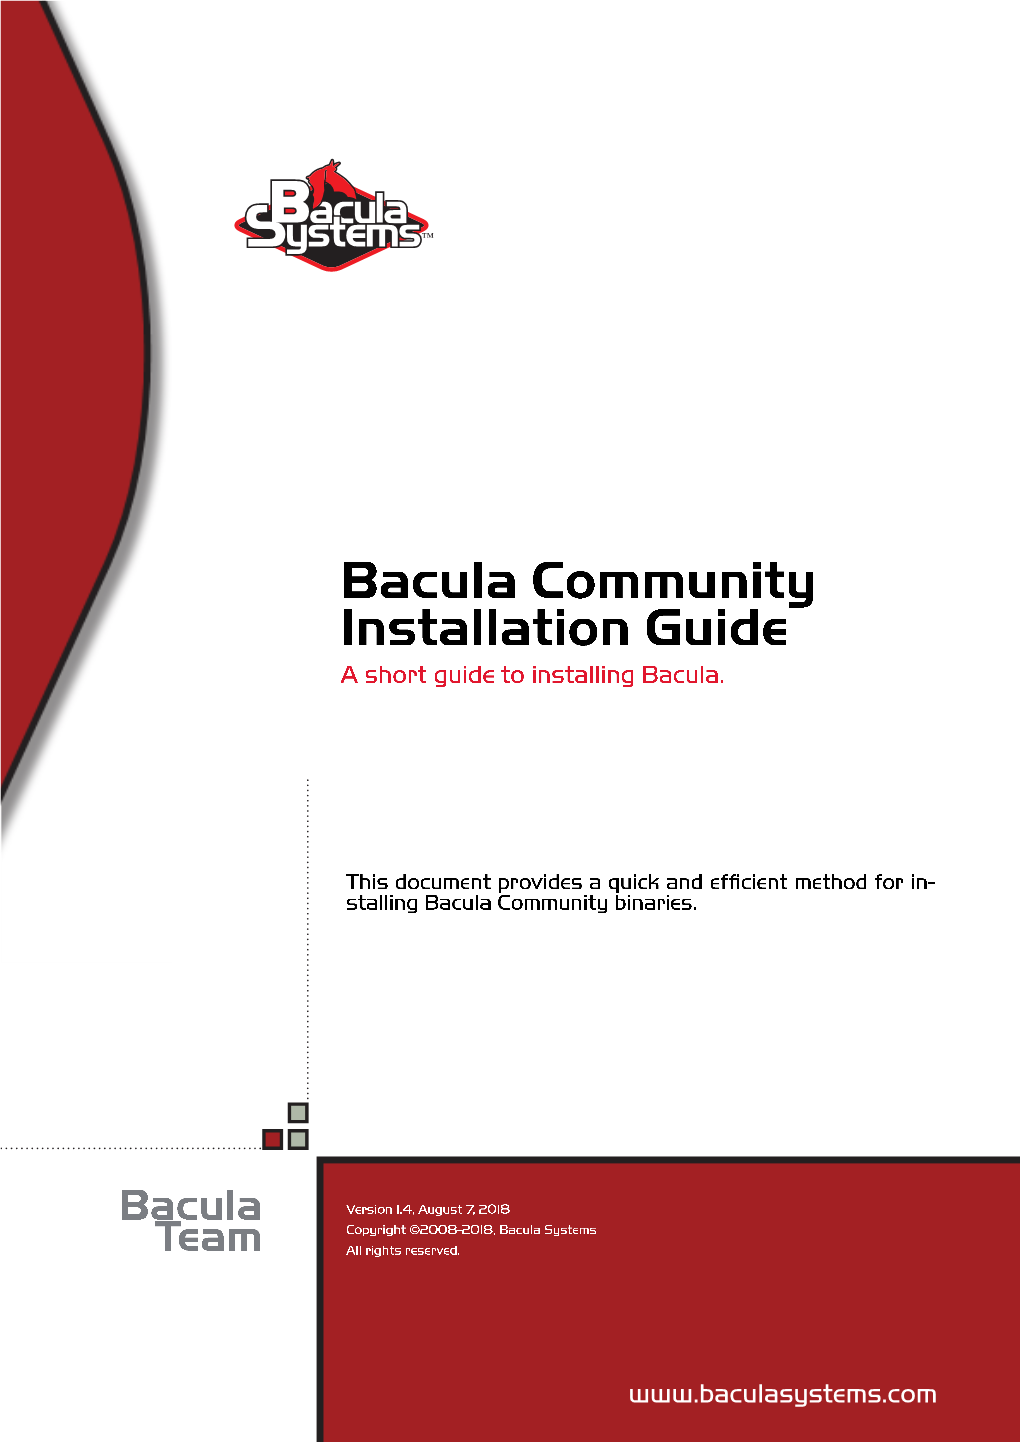 Bacula Community Installation Guide a Short Guide to Installing Bacula